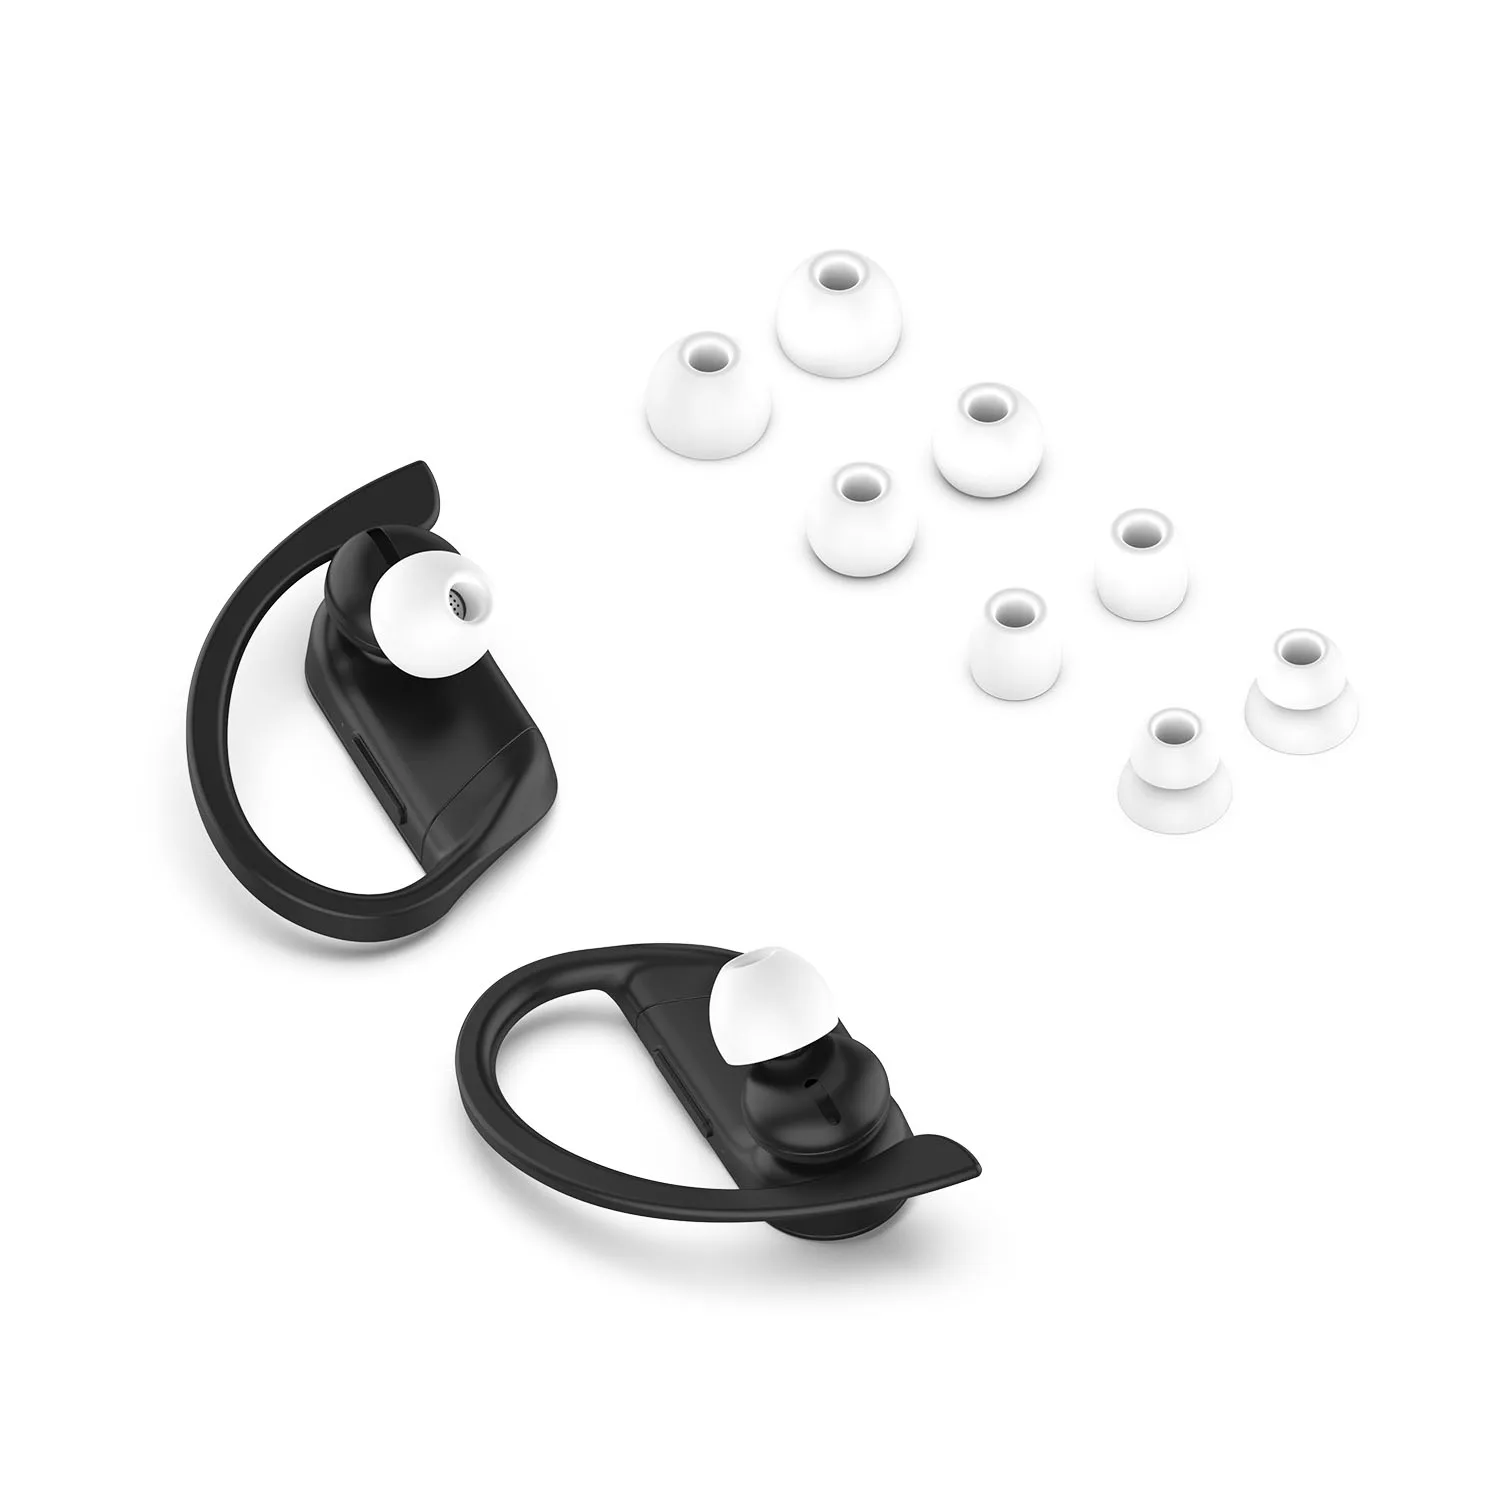 Universal Silicone Earphone Earbuds Bluetooth Headset Waterproof for Beats Powerbeats Pro / 3 Magic Sound Wireless Accessories